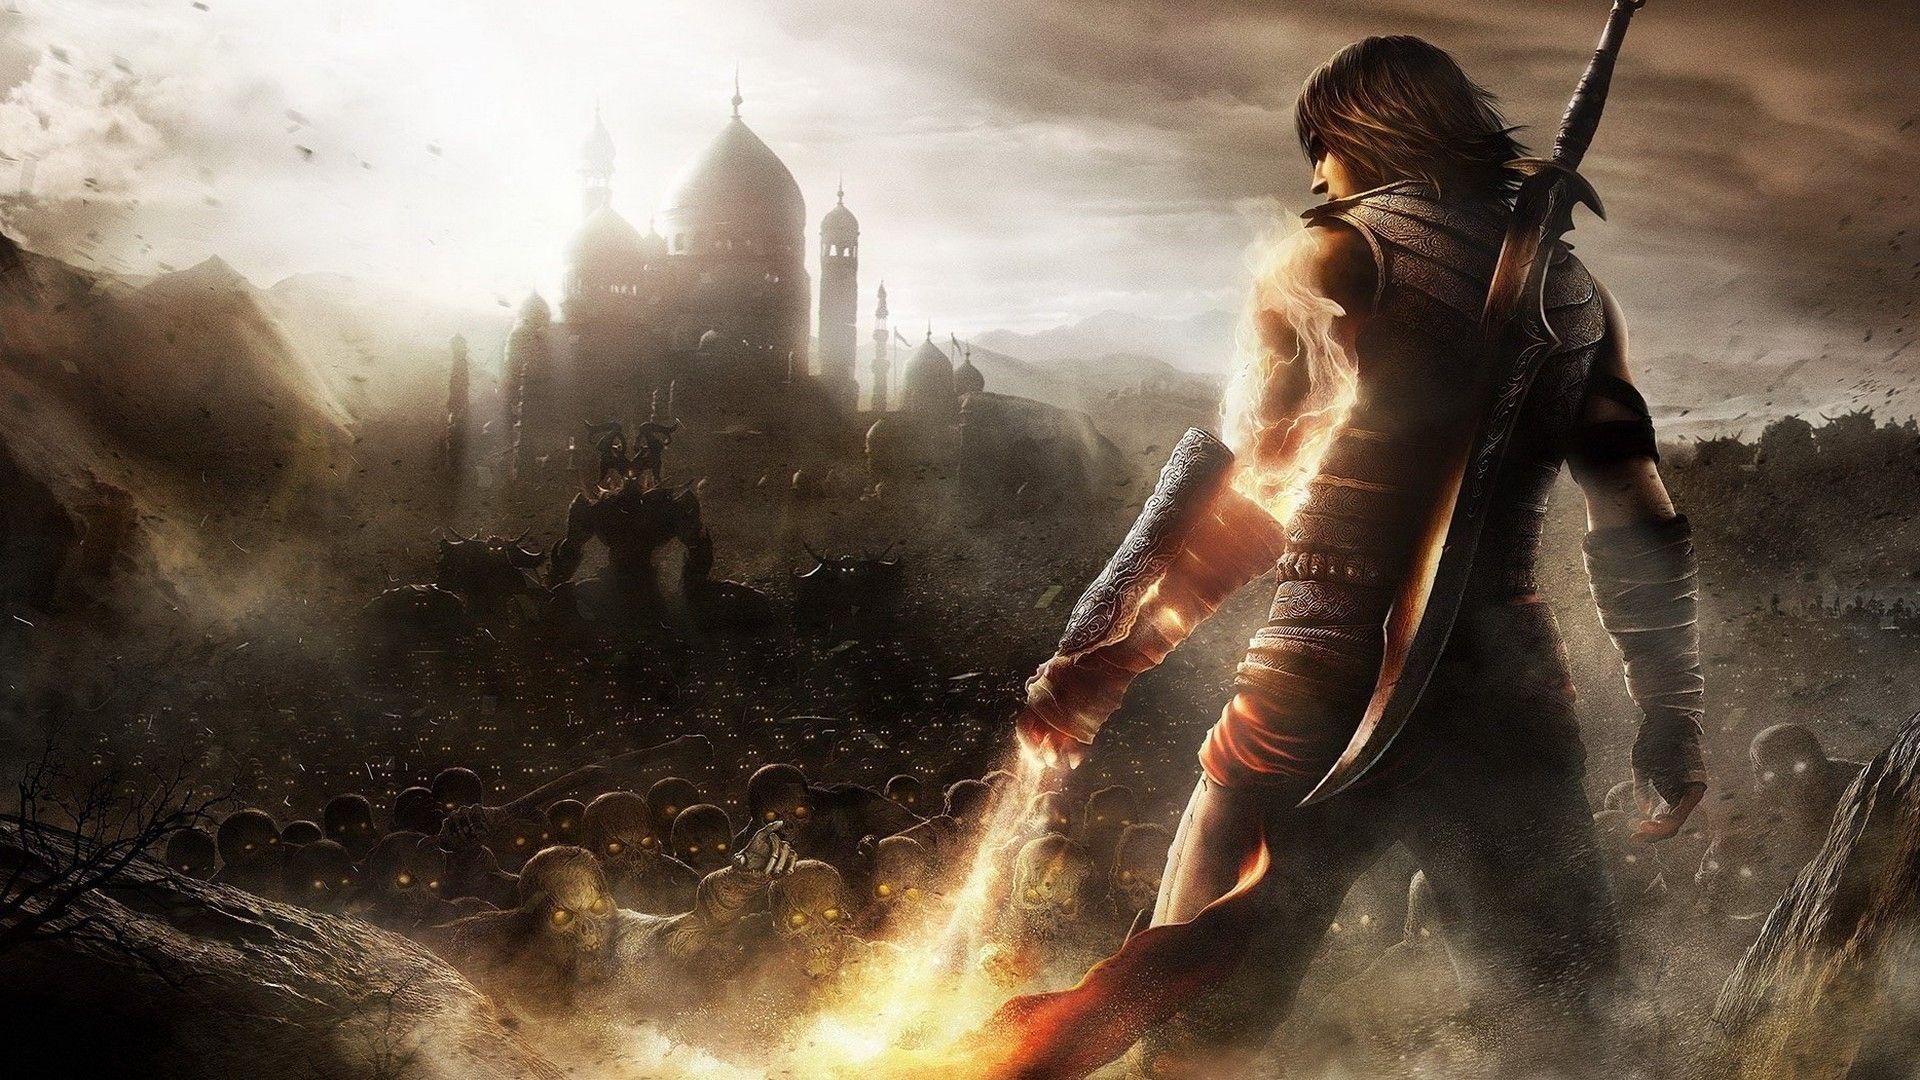 Prince of Persia the two thrones Wallpaper | HD Wallpapers .